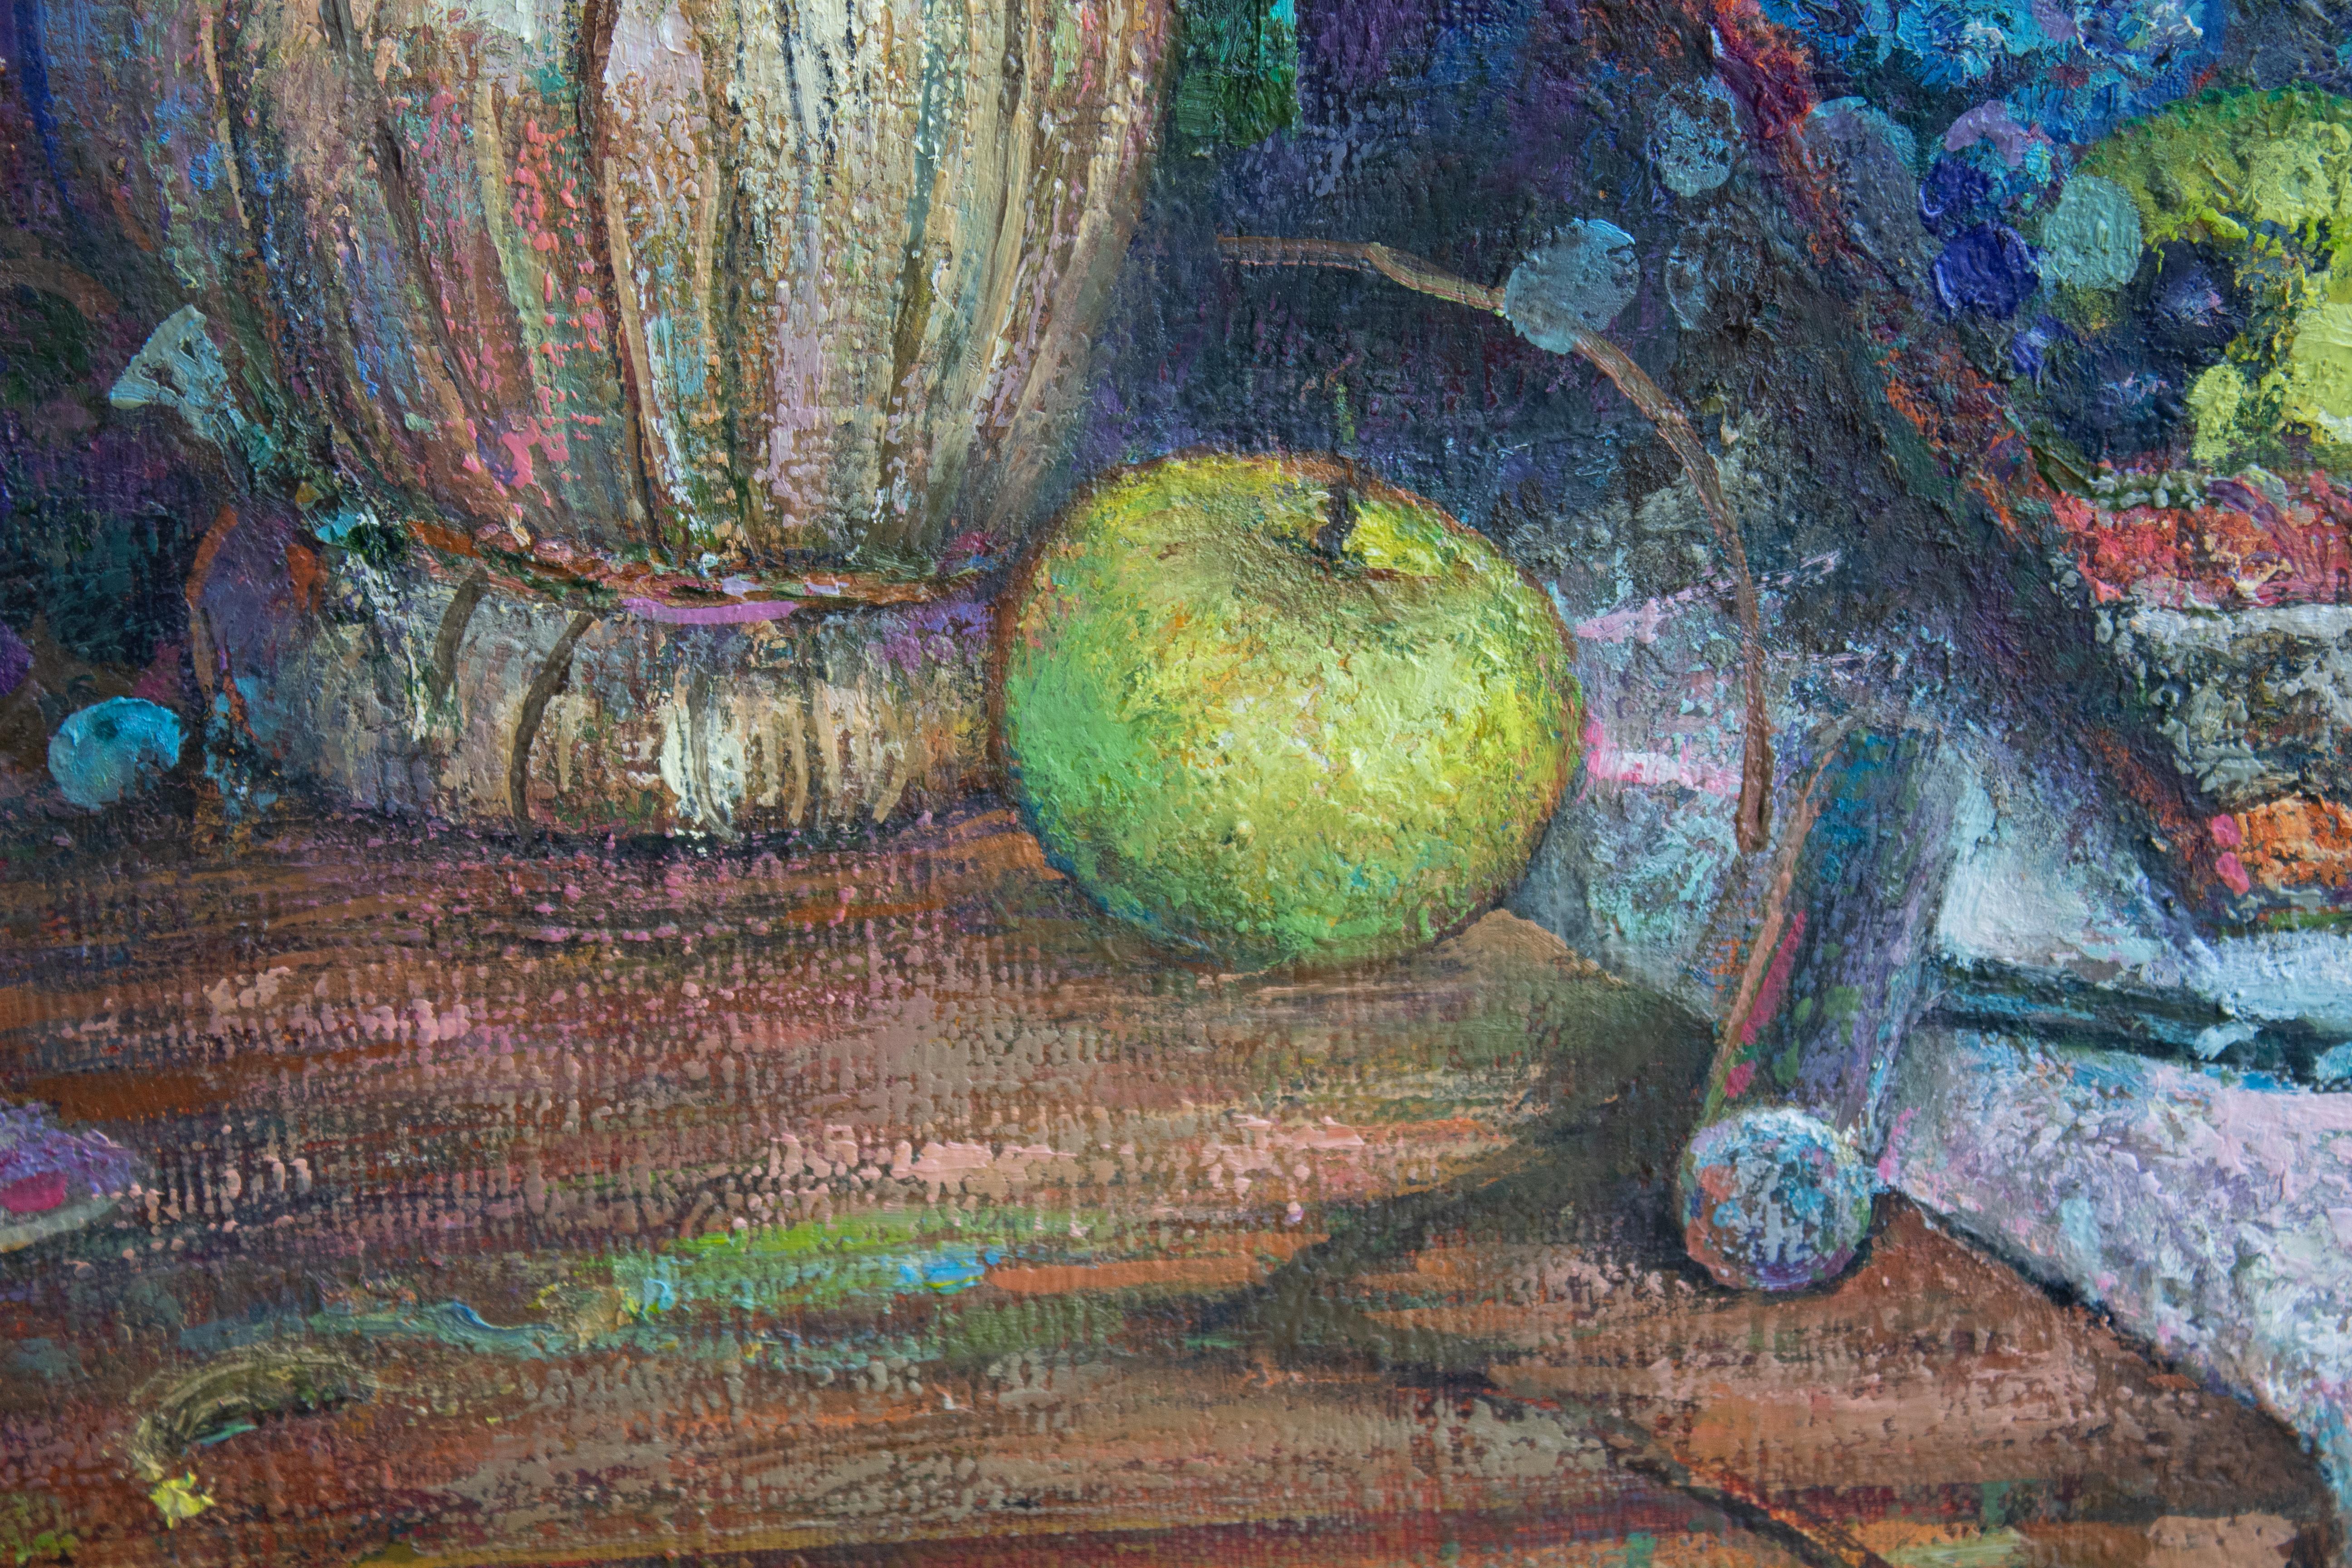 October's Wines - Oil Painting Oil Colors Green White Brown Grey Purple Blue 2